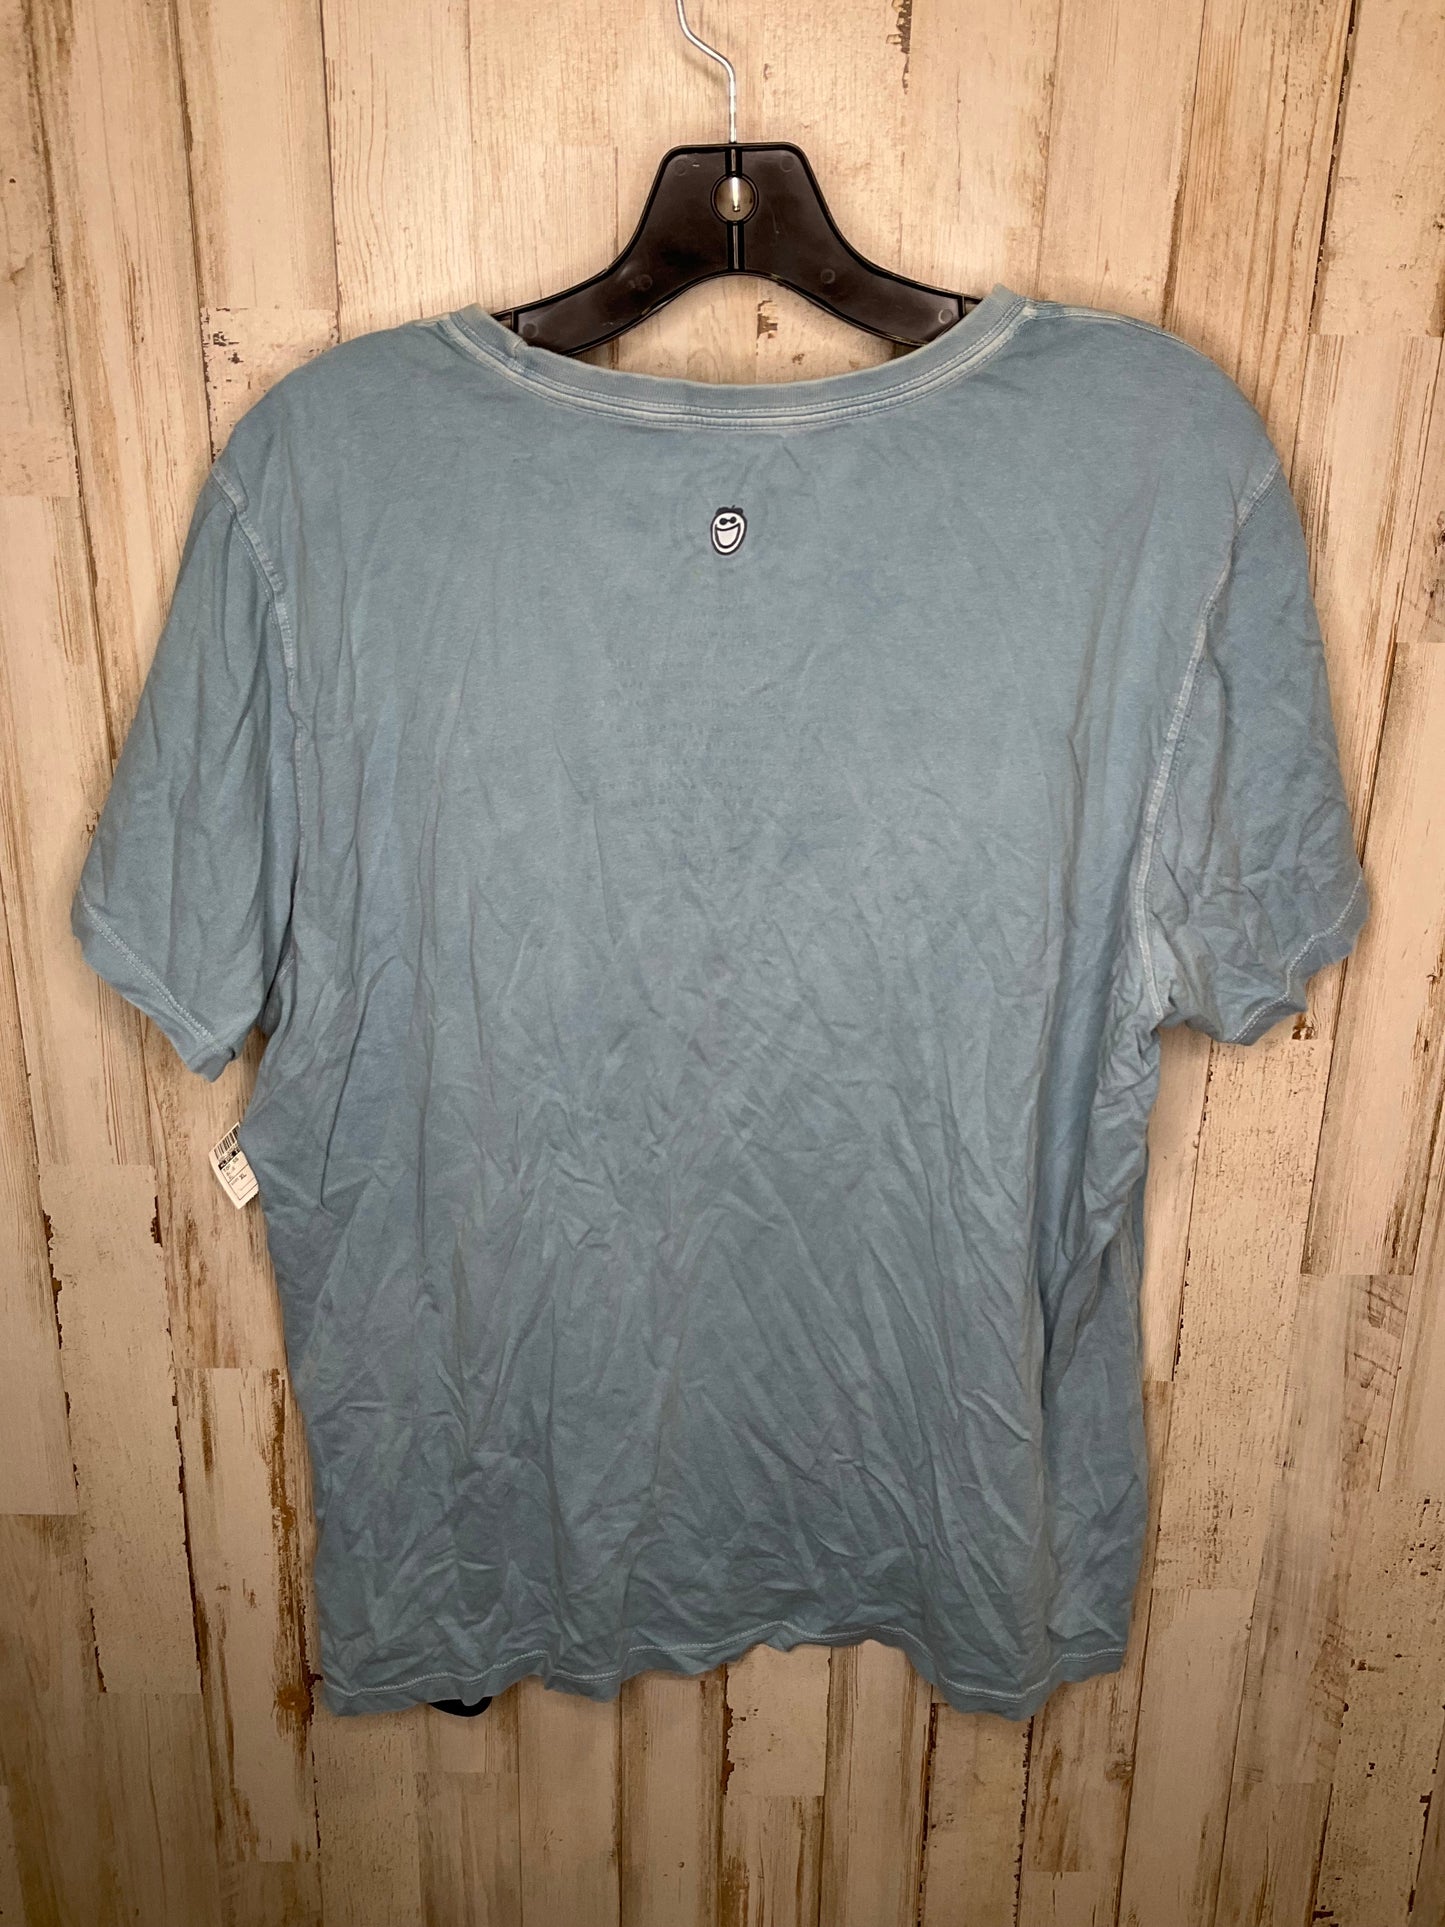 Blue Top Short Sleeve Life Is Good, Size Xl